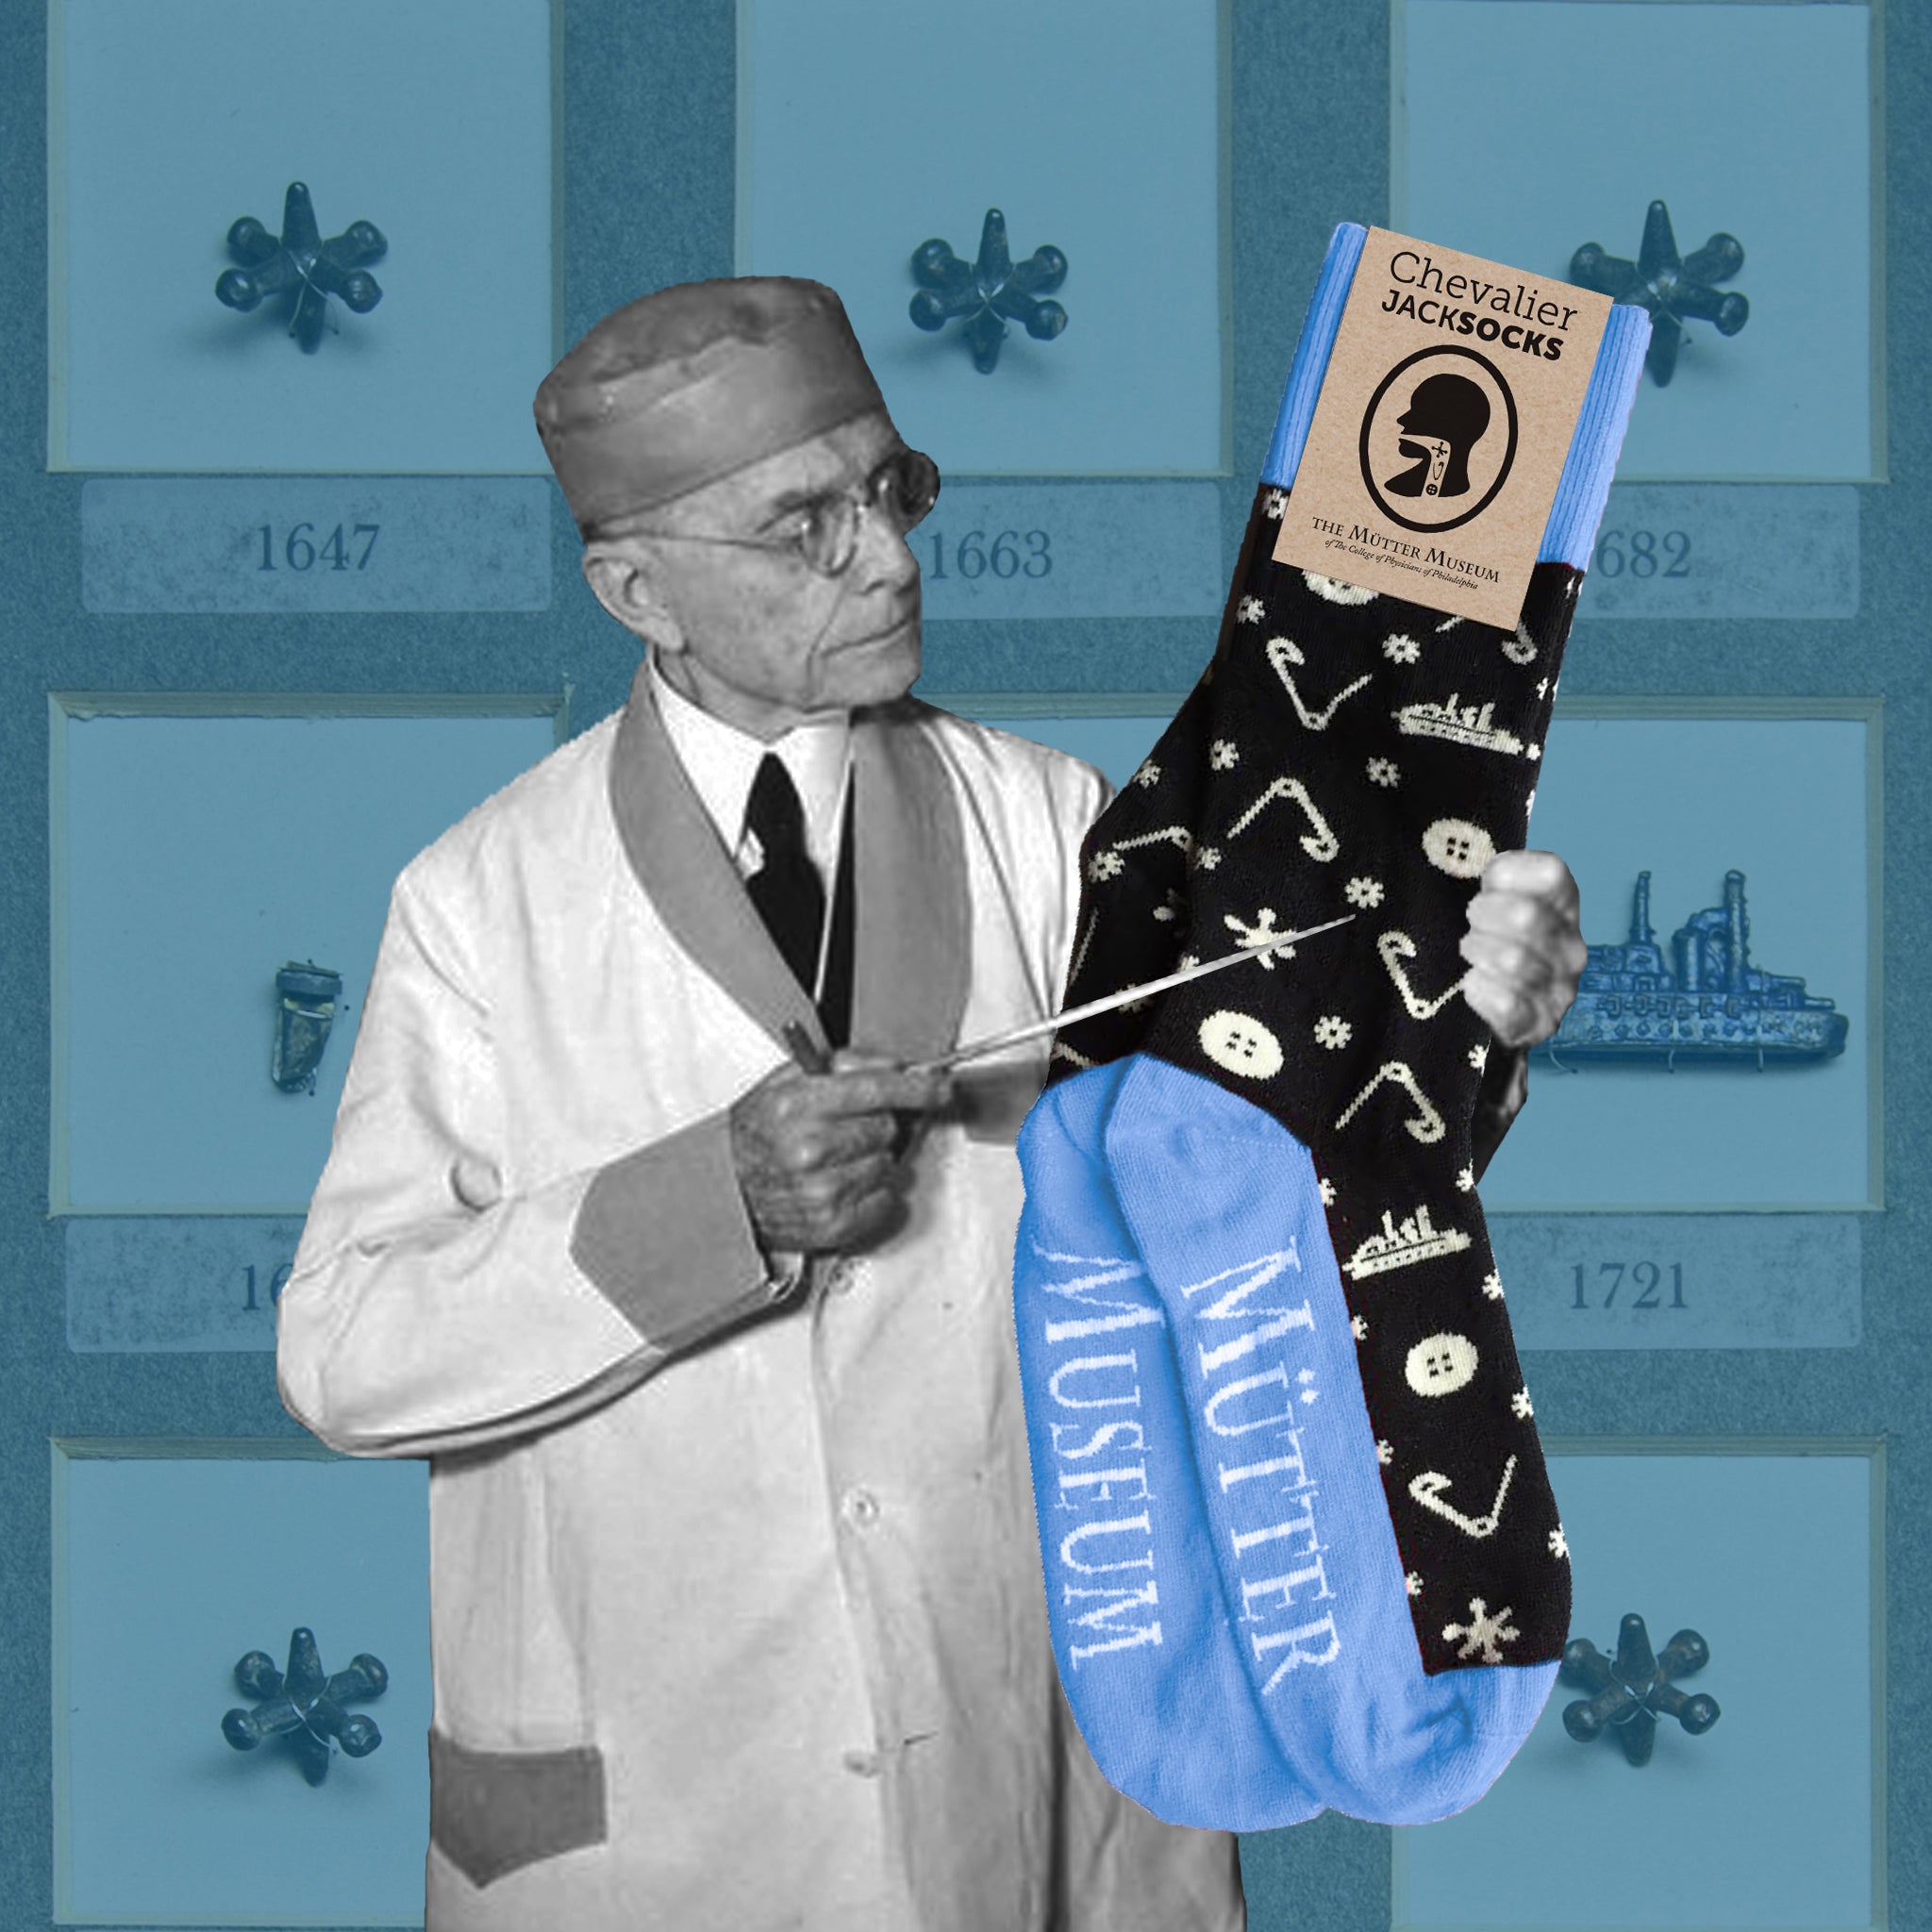 A pair of black socks with blue heels, toes, and ankles. There are white pictures of safety pins, buttons, and a ship on it. There is a photo of Dr. Jackson pointing at the socks with an image of one of the Chevalier Jackson drawers in the background.